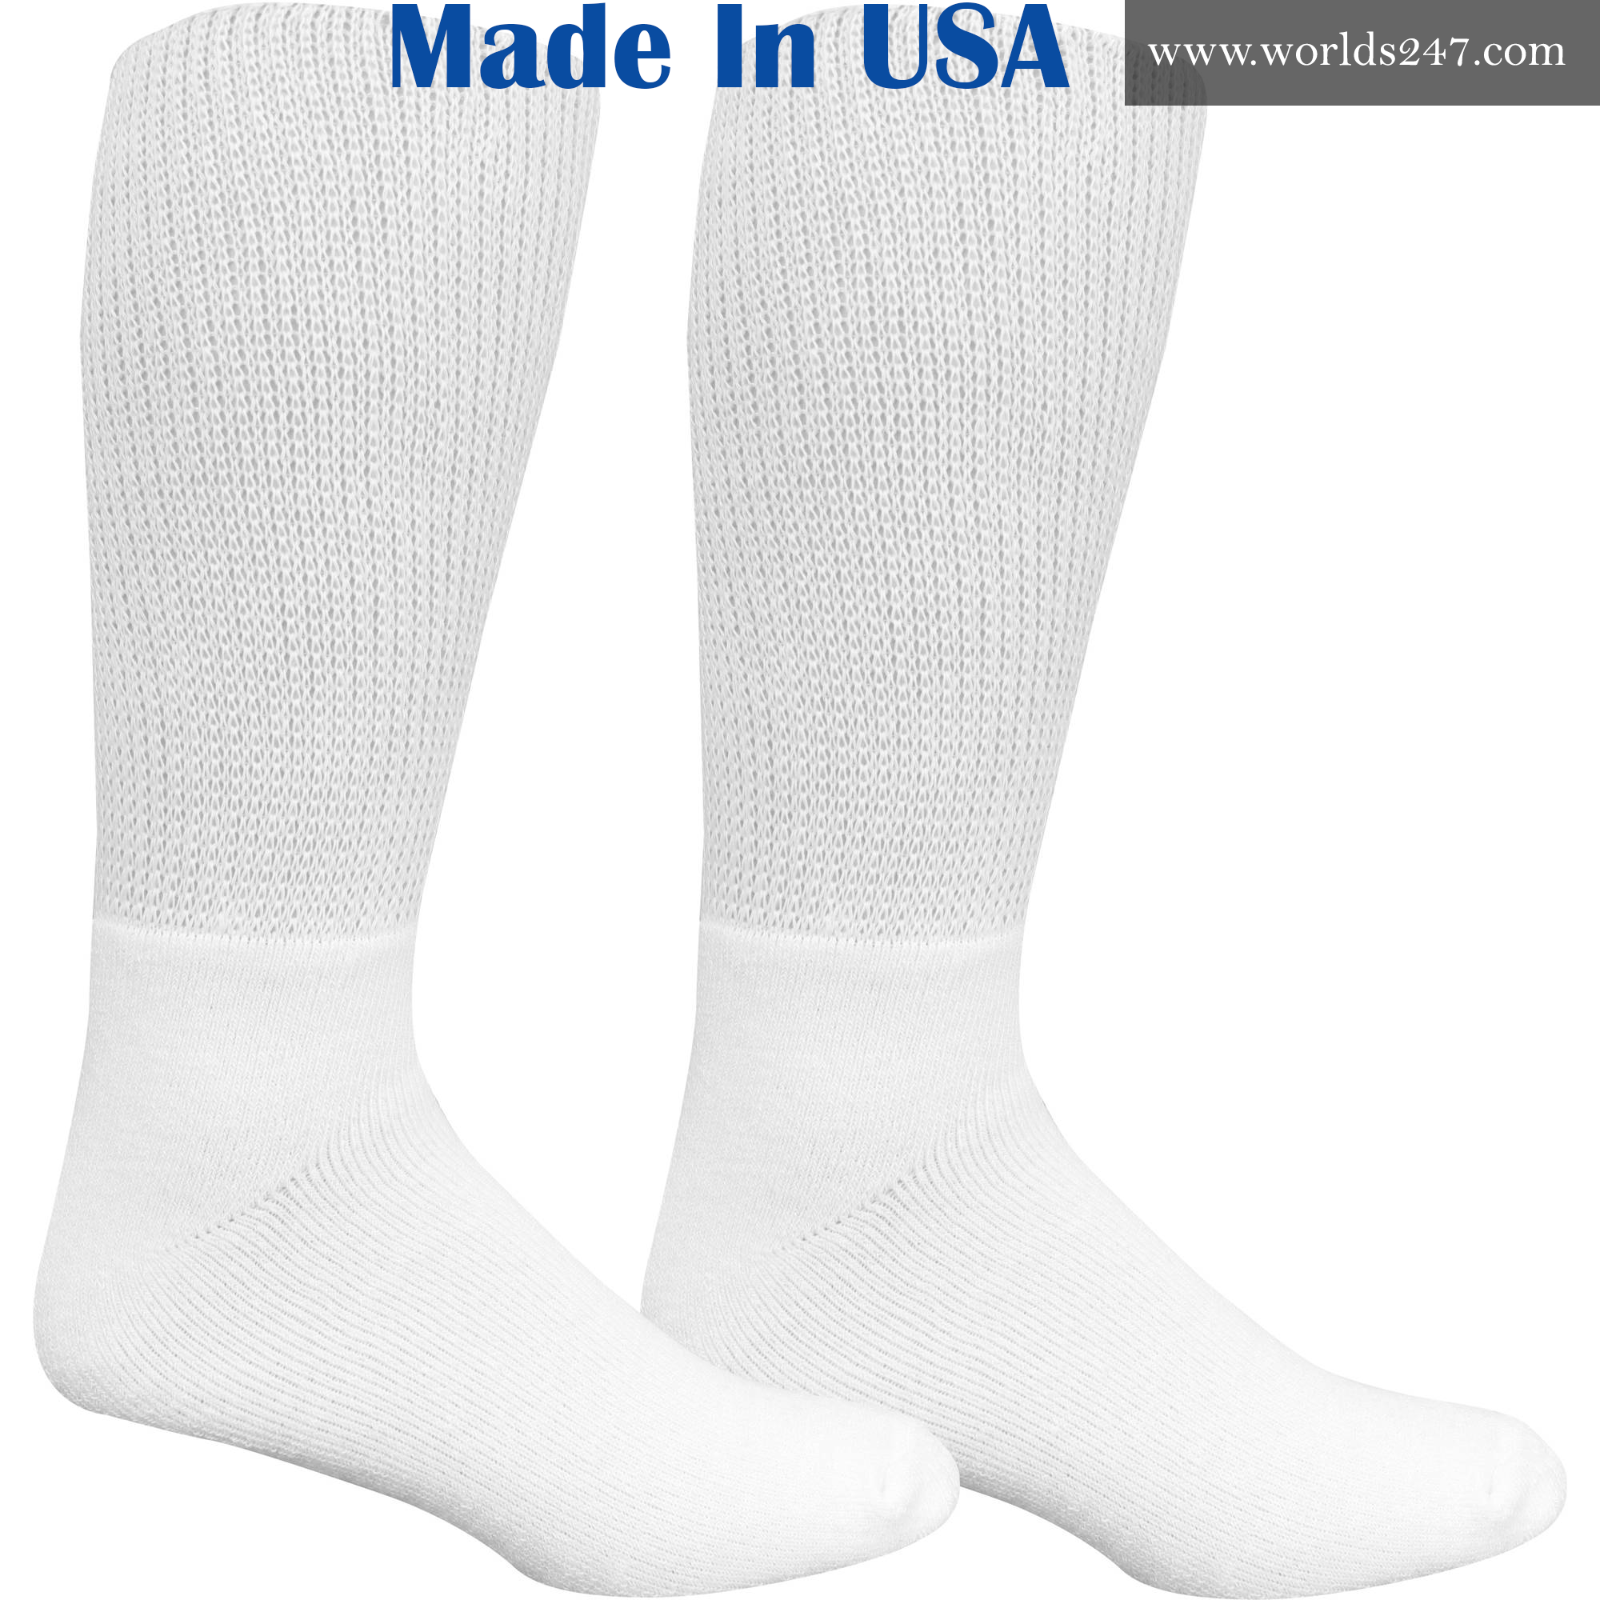 BEST QUALITY CREW DIABETIC SOCKS 6,12,18 PAIR MADE IN USA SIZE 9-11,10-13 &13-15 Physician's Choice - фотография #6